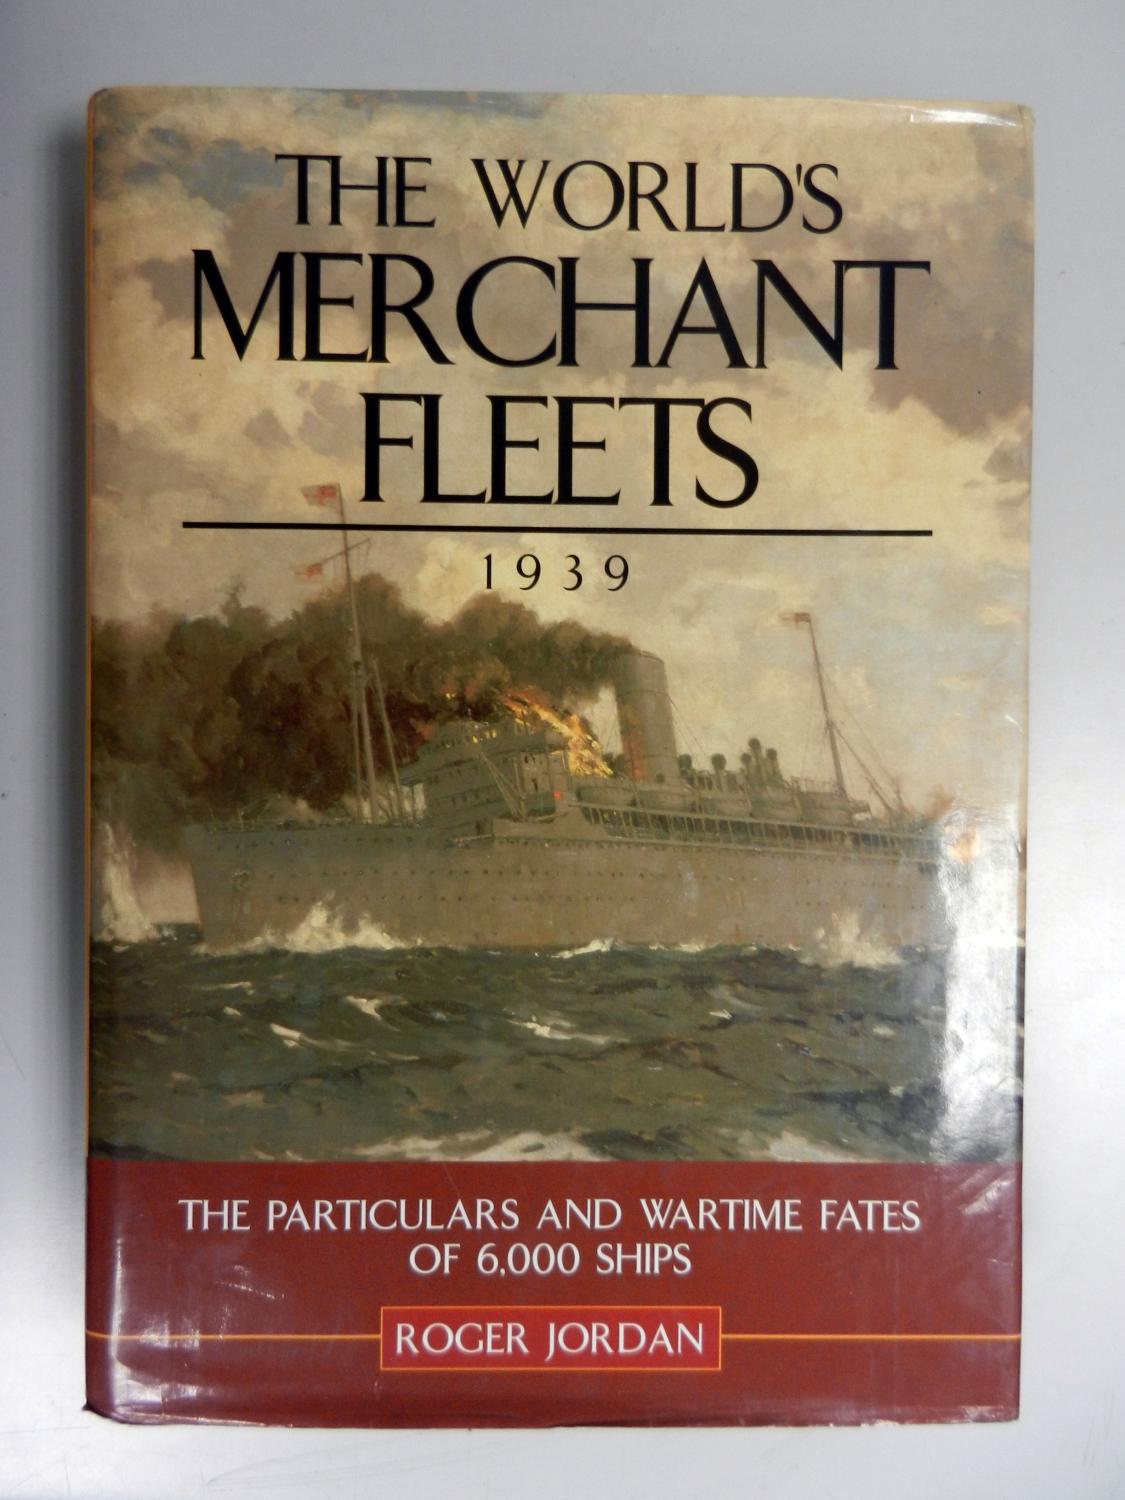 The World's Merchant Fleets, 1939: The Particulars and Wartime Fates of 6,000 Ships: 6000 Ships and Their Wartime Fates